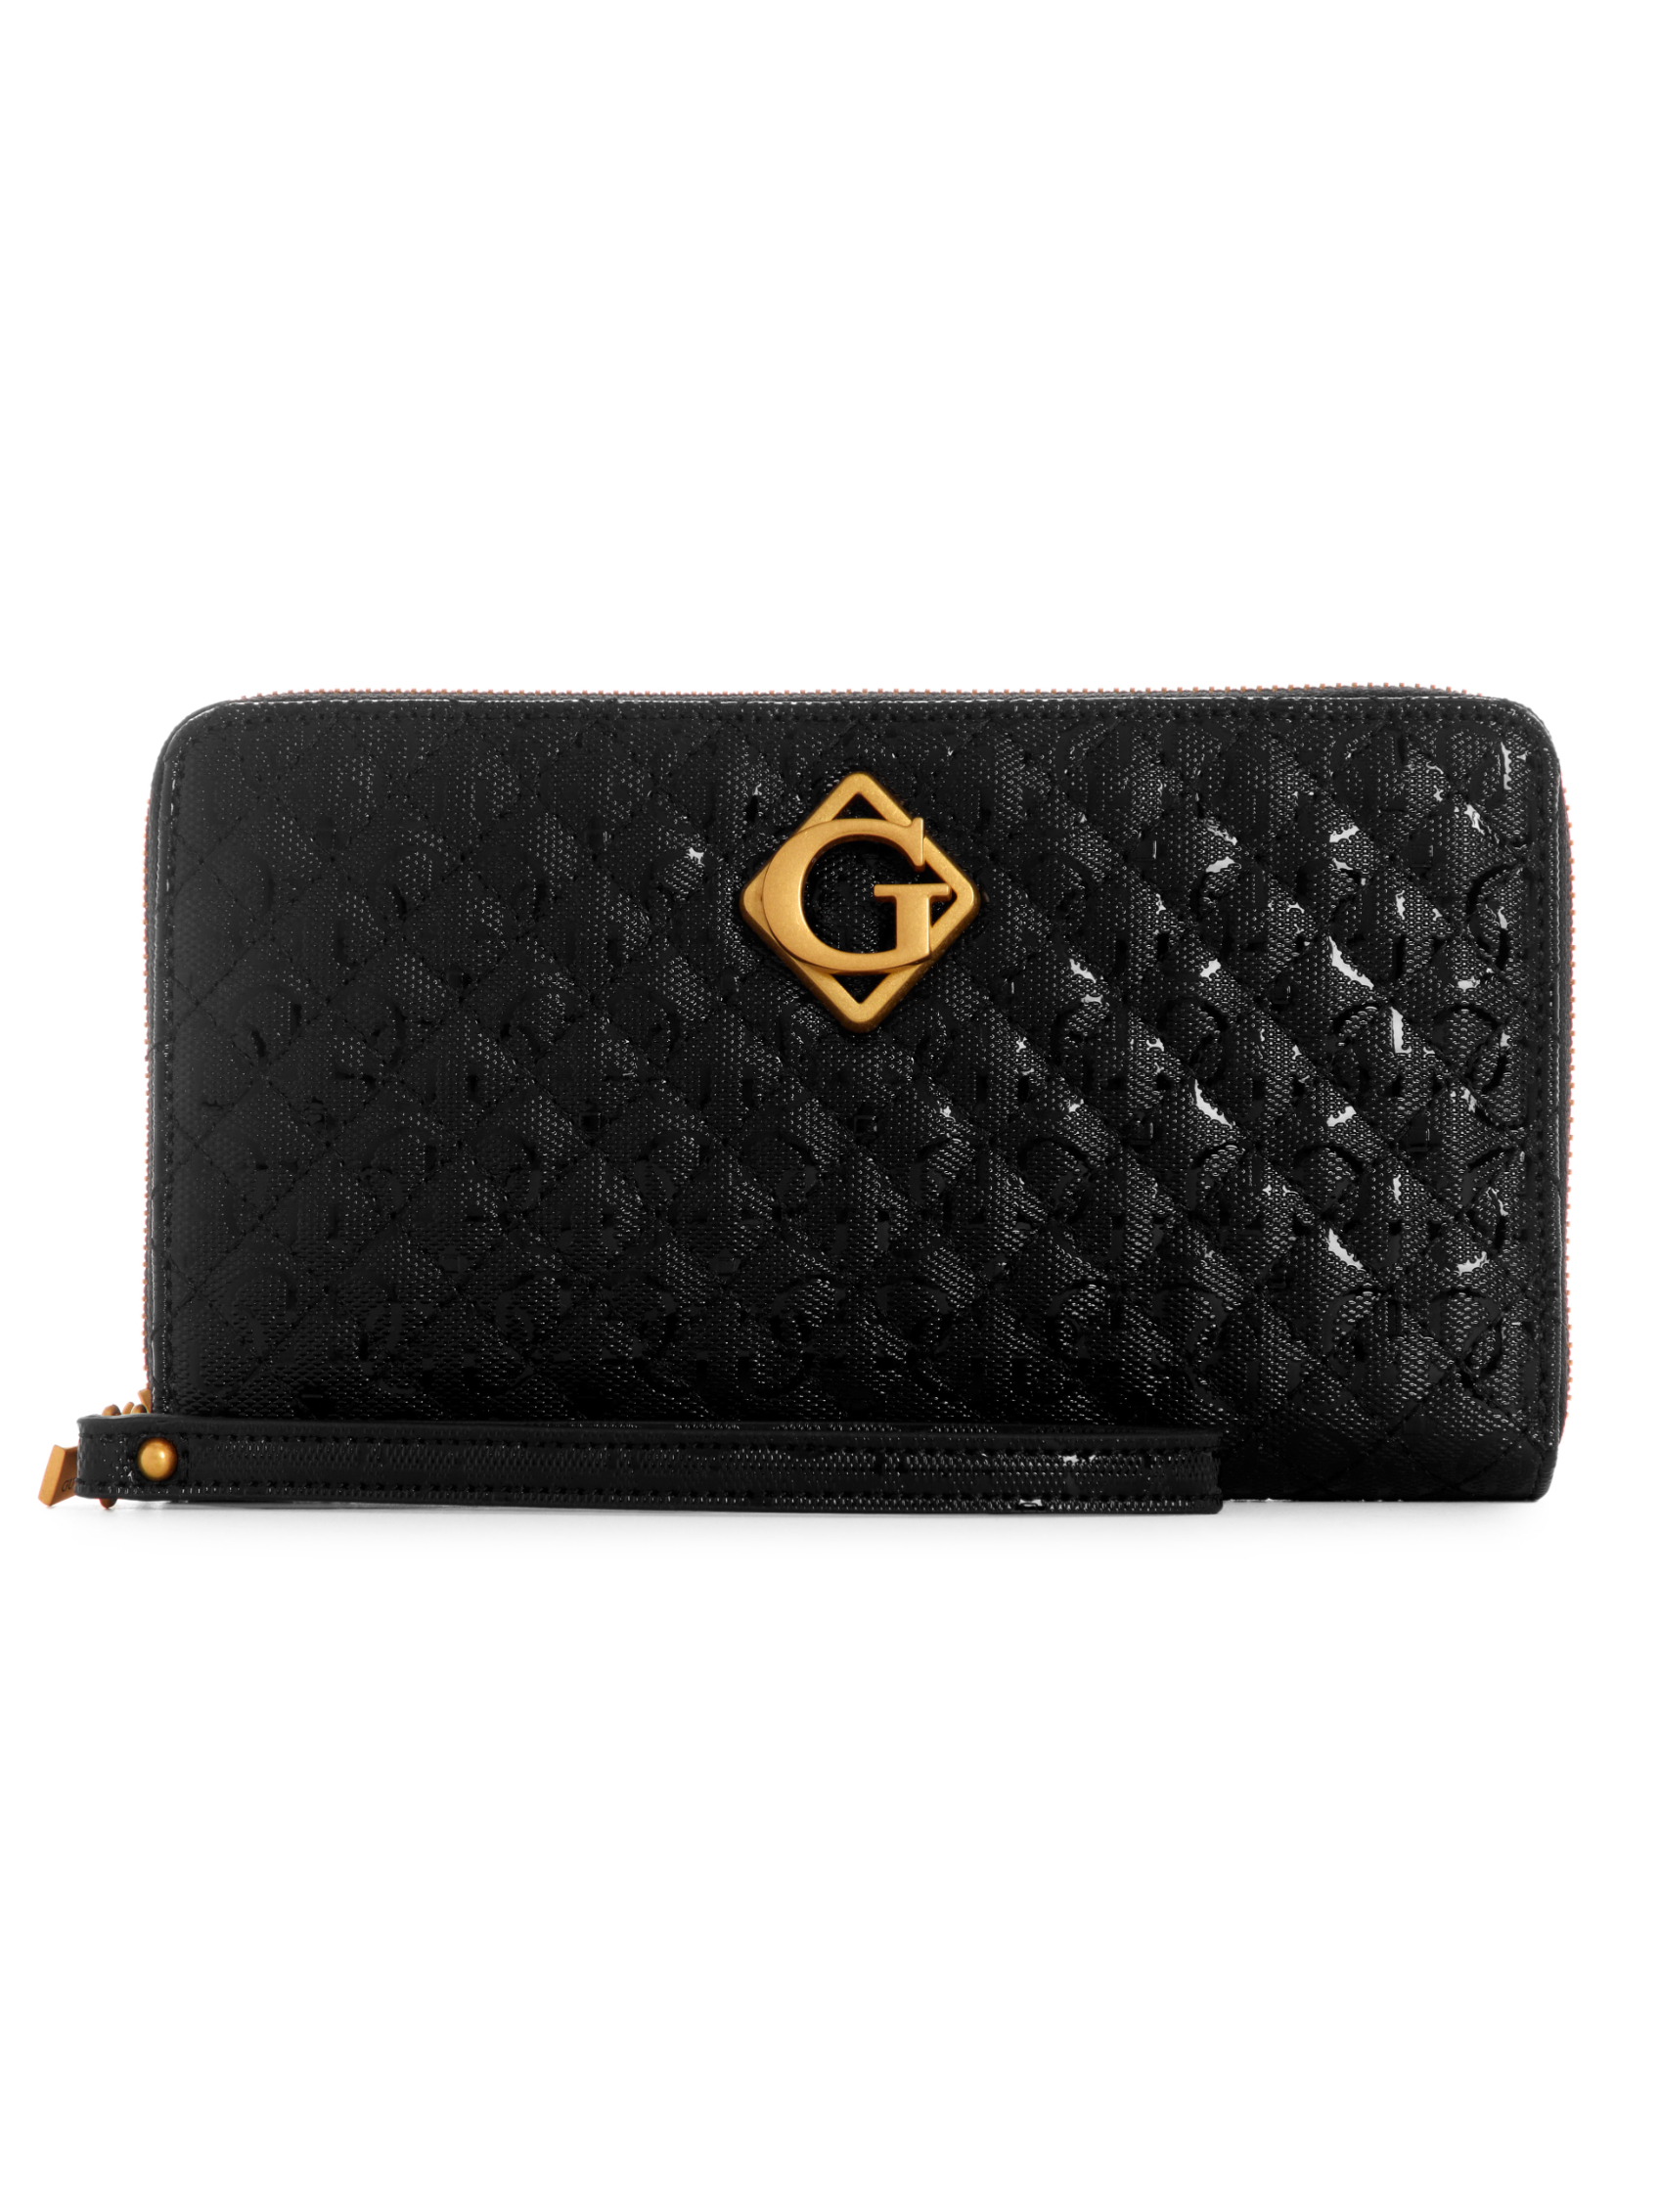 NERINA SLING CHEQUE ORGANIZER | Guess Philippines